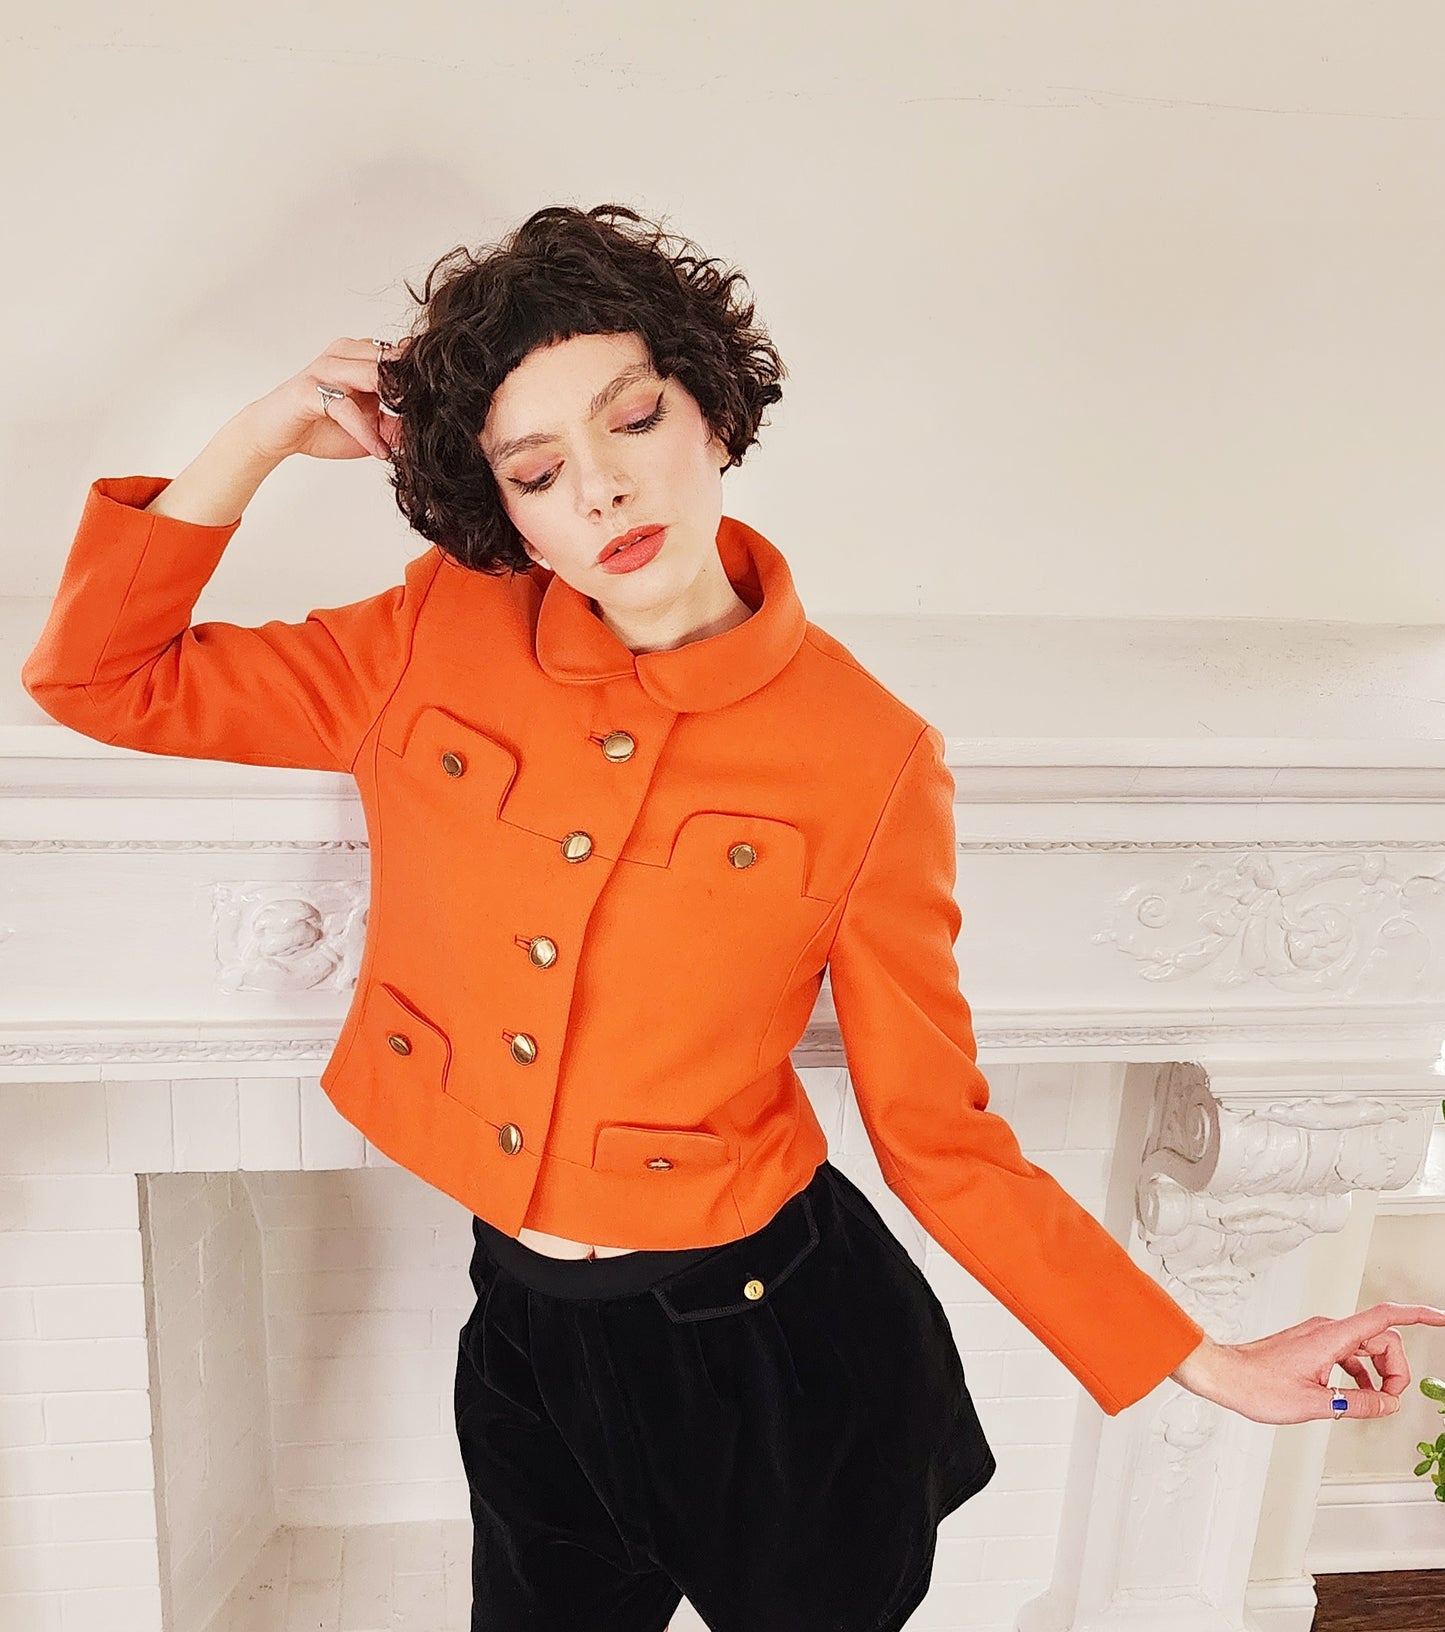 60s Orange Blazer / Boxy Jacket with Gold Buttons Small by Vilano